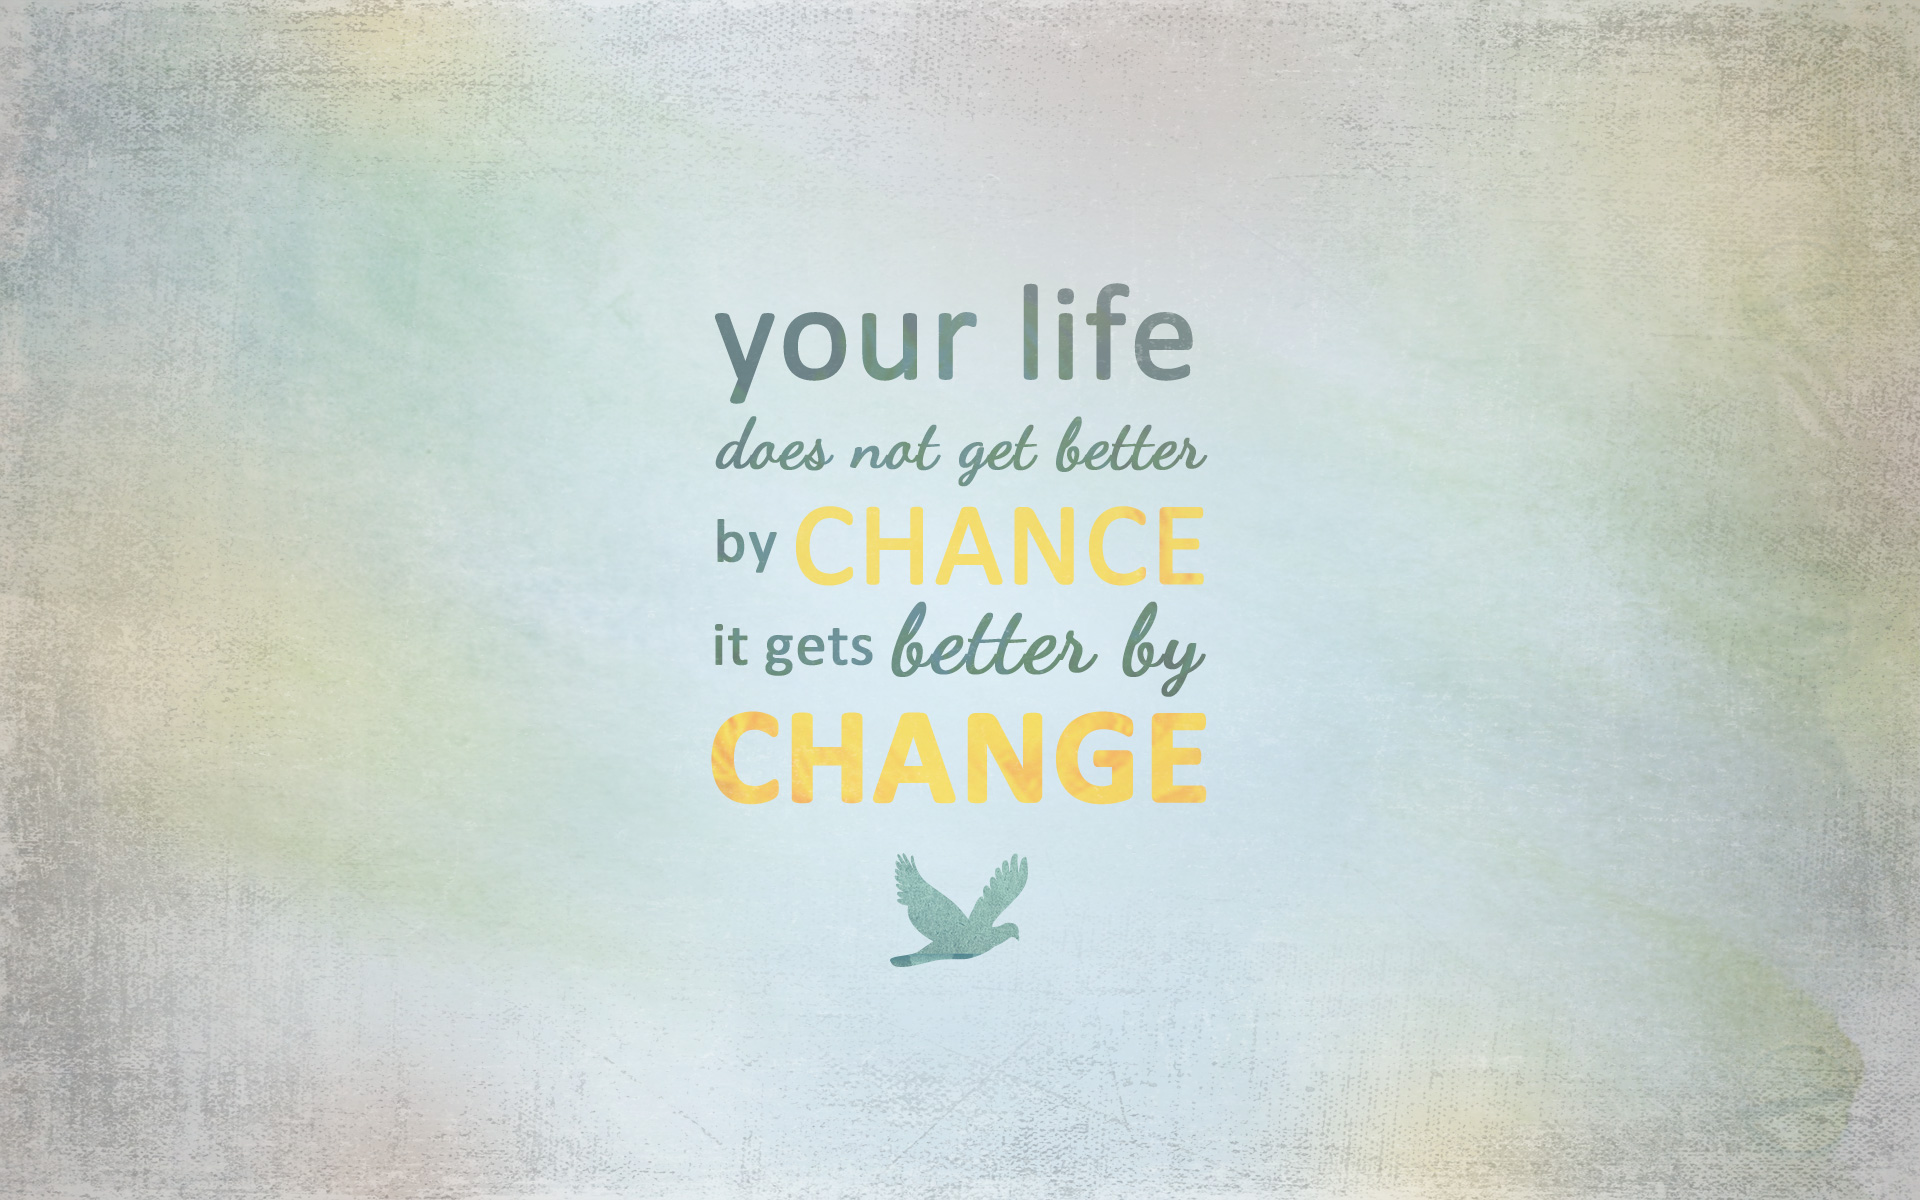 Inspirational Wallpapers -Life Gets Batter By Change 